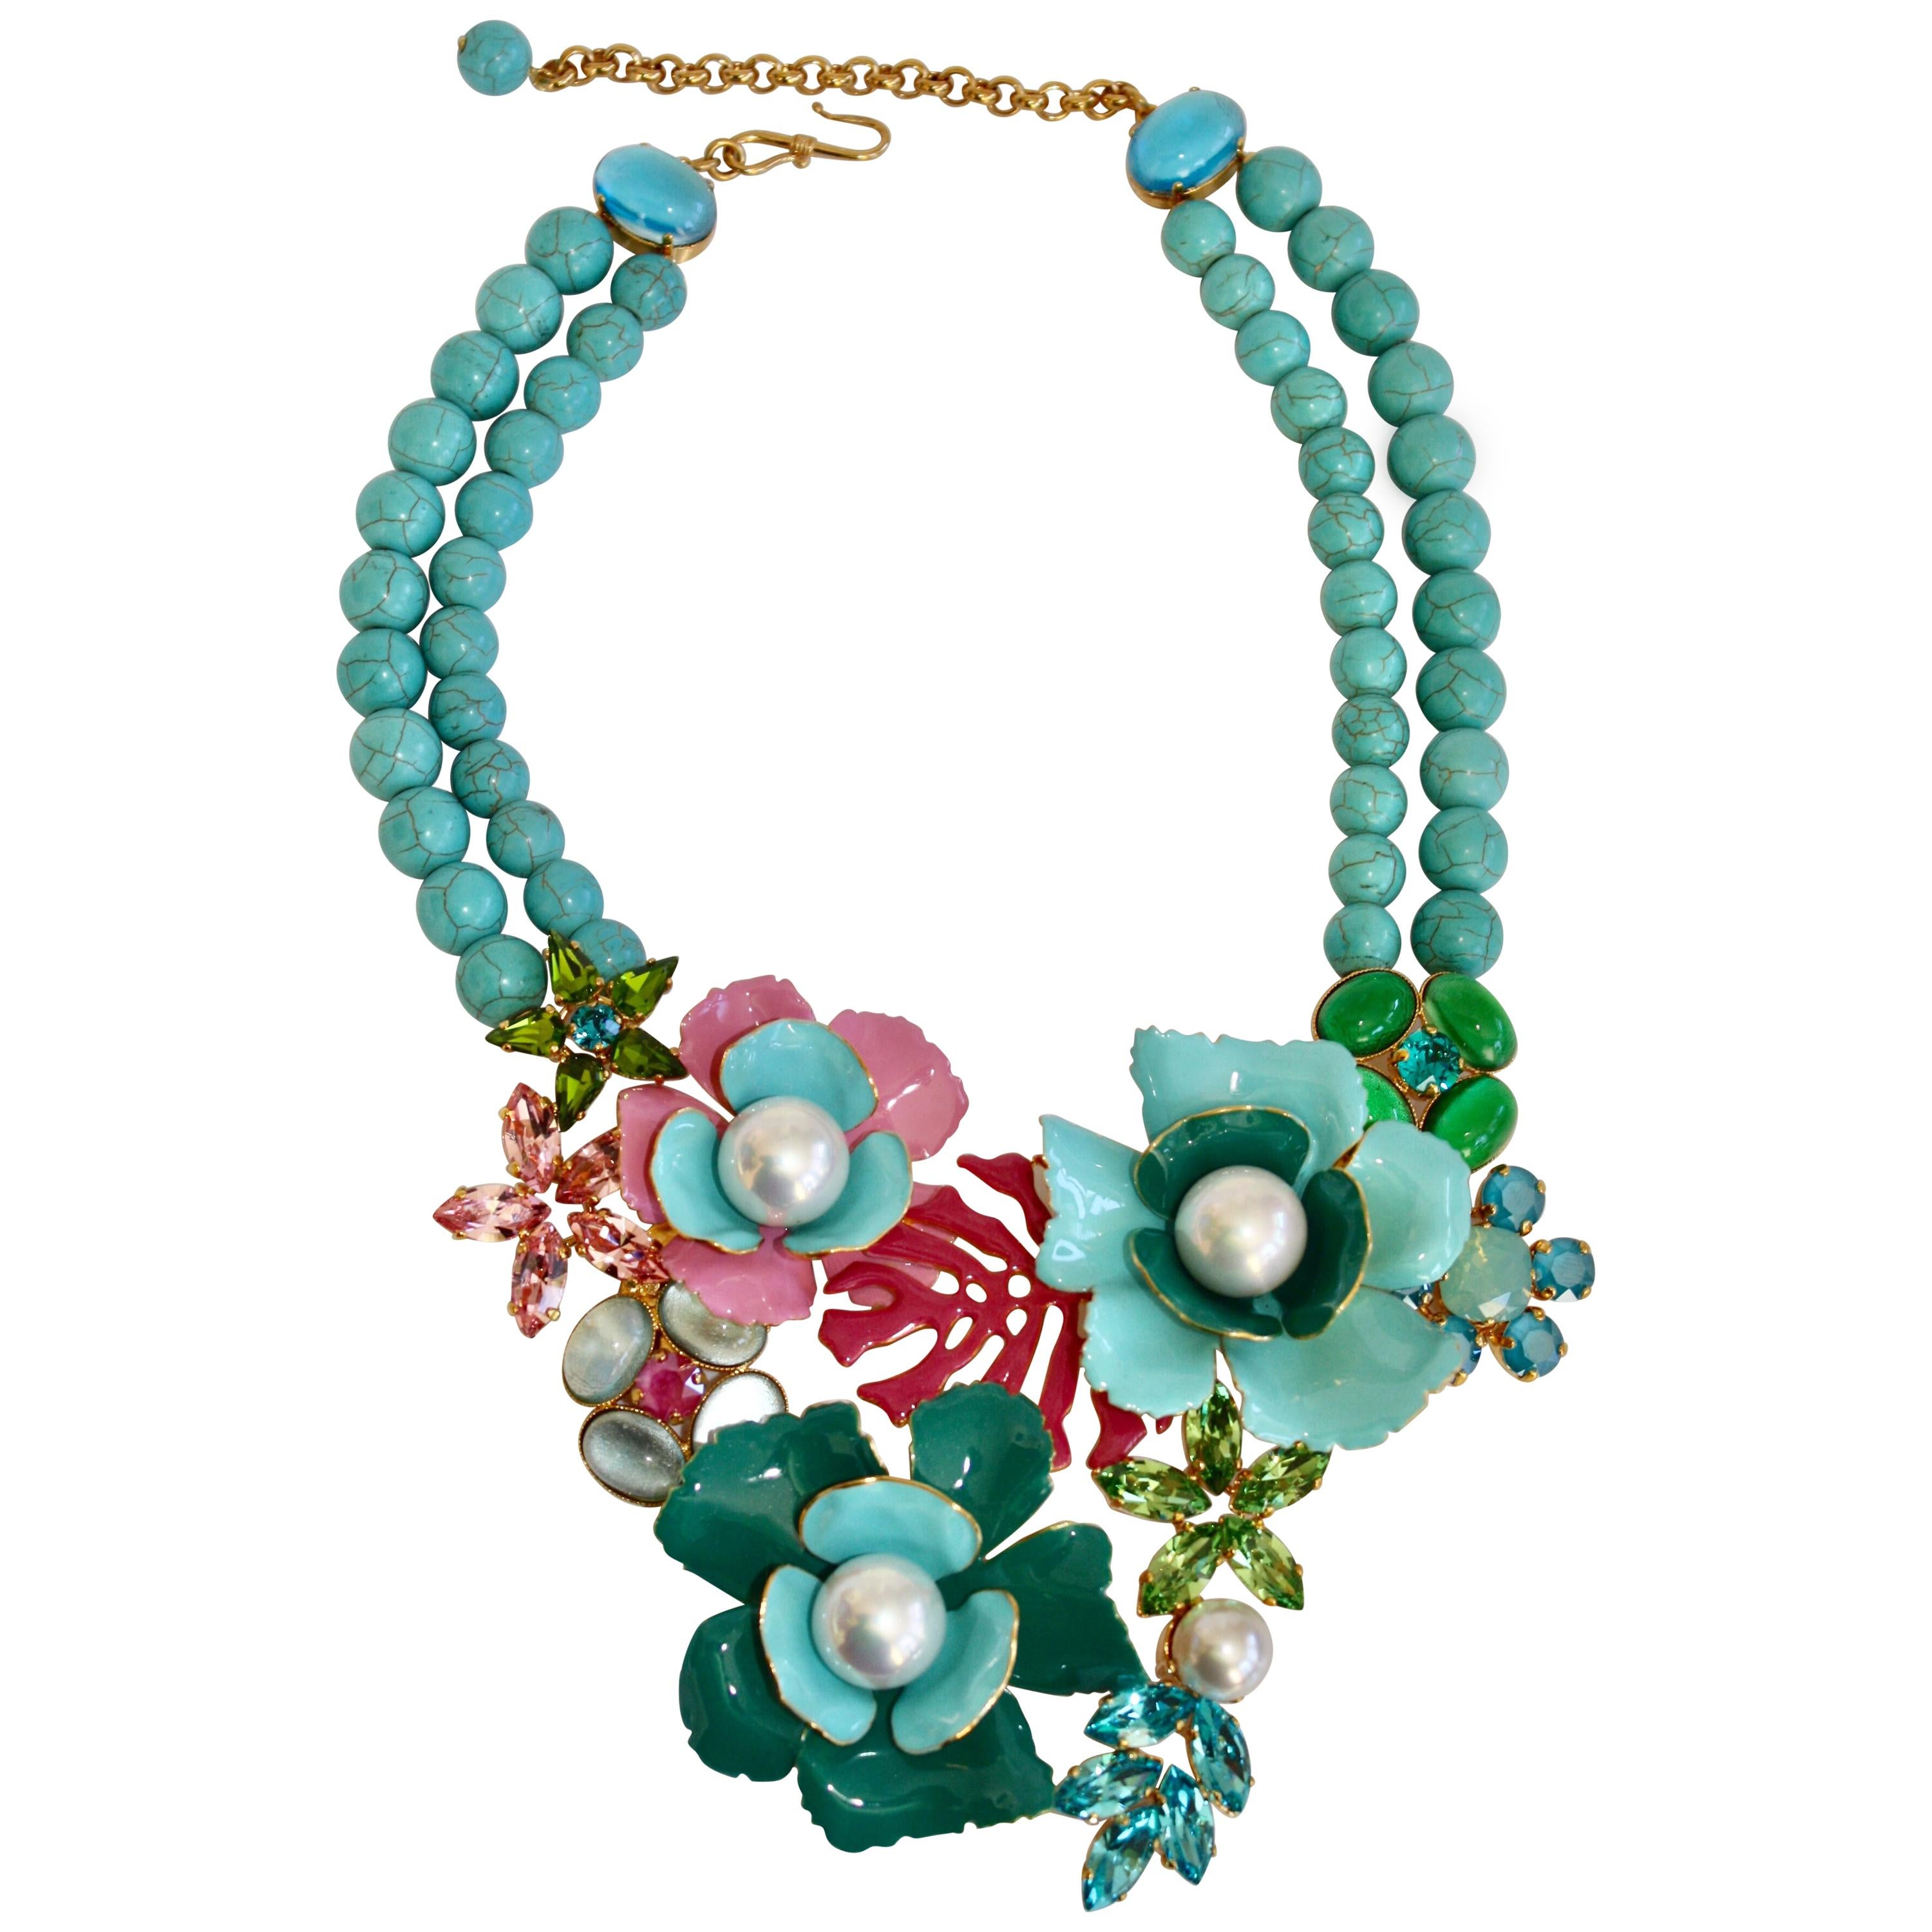 Philippe Ferrandis Turquoise Stone Necklace with Enamel and Swarovski Crystals